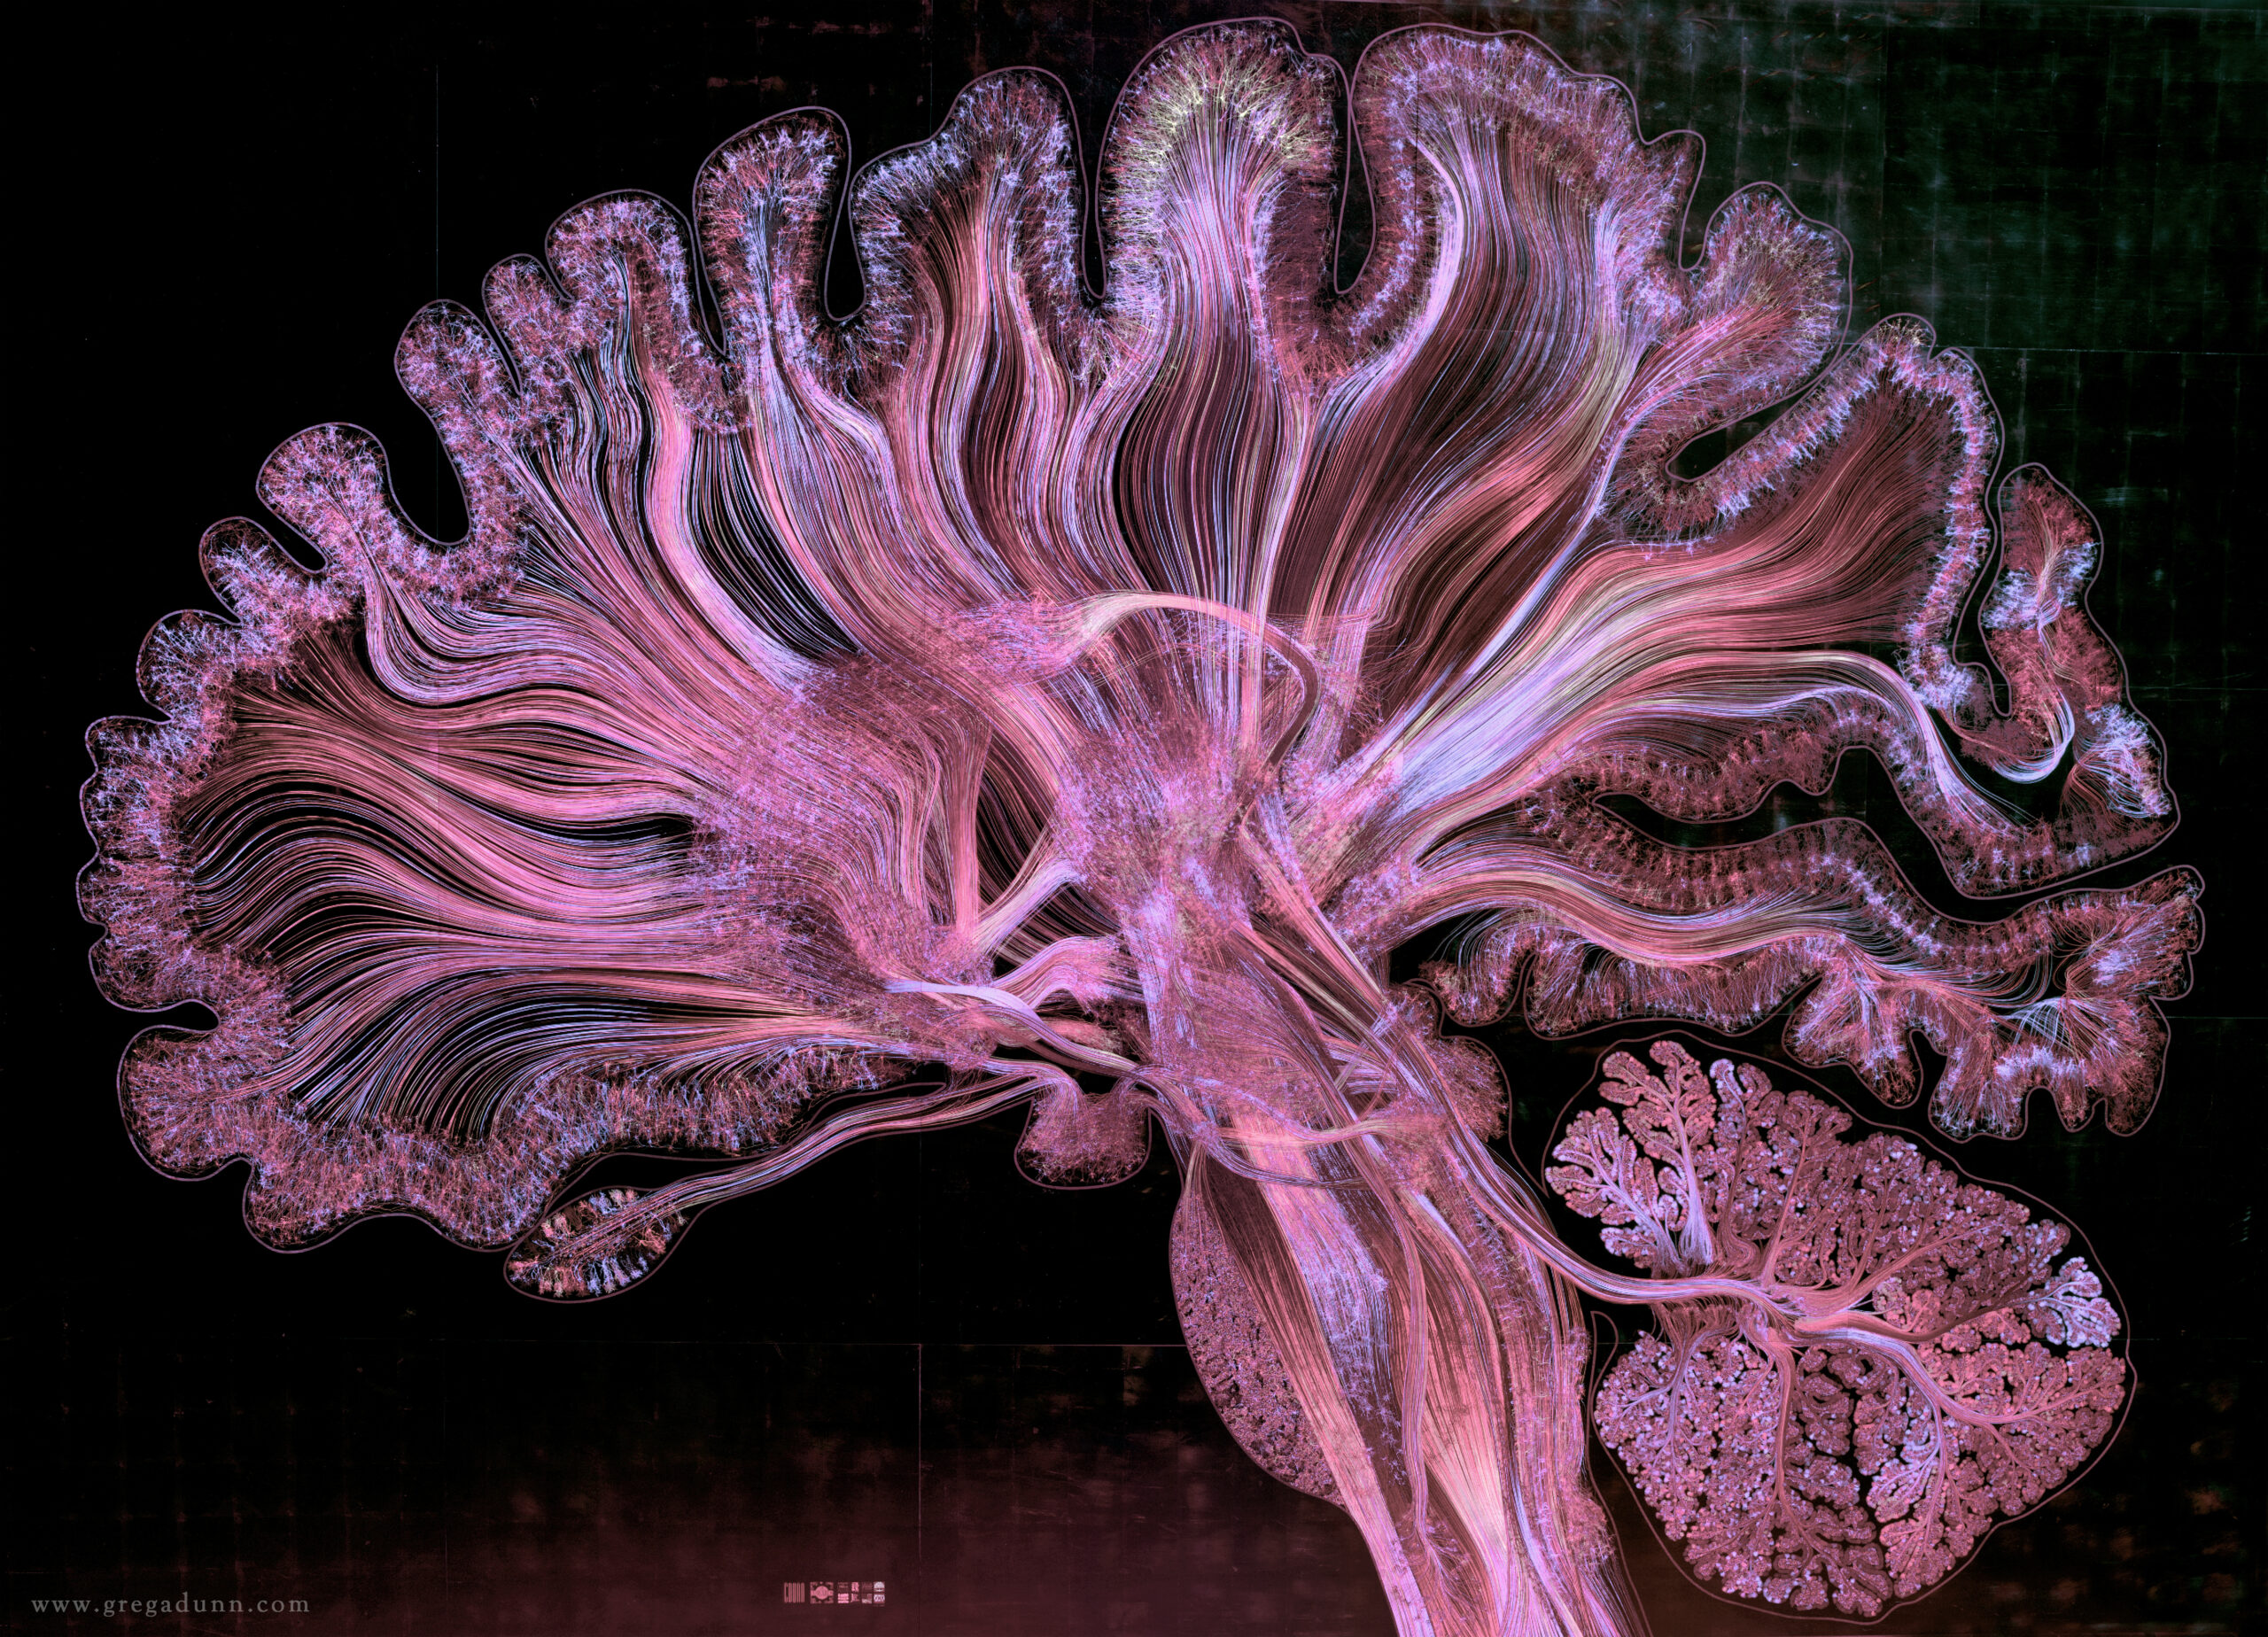 The 10 best science images, videos, and visualizations of the year